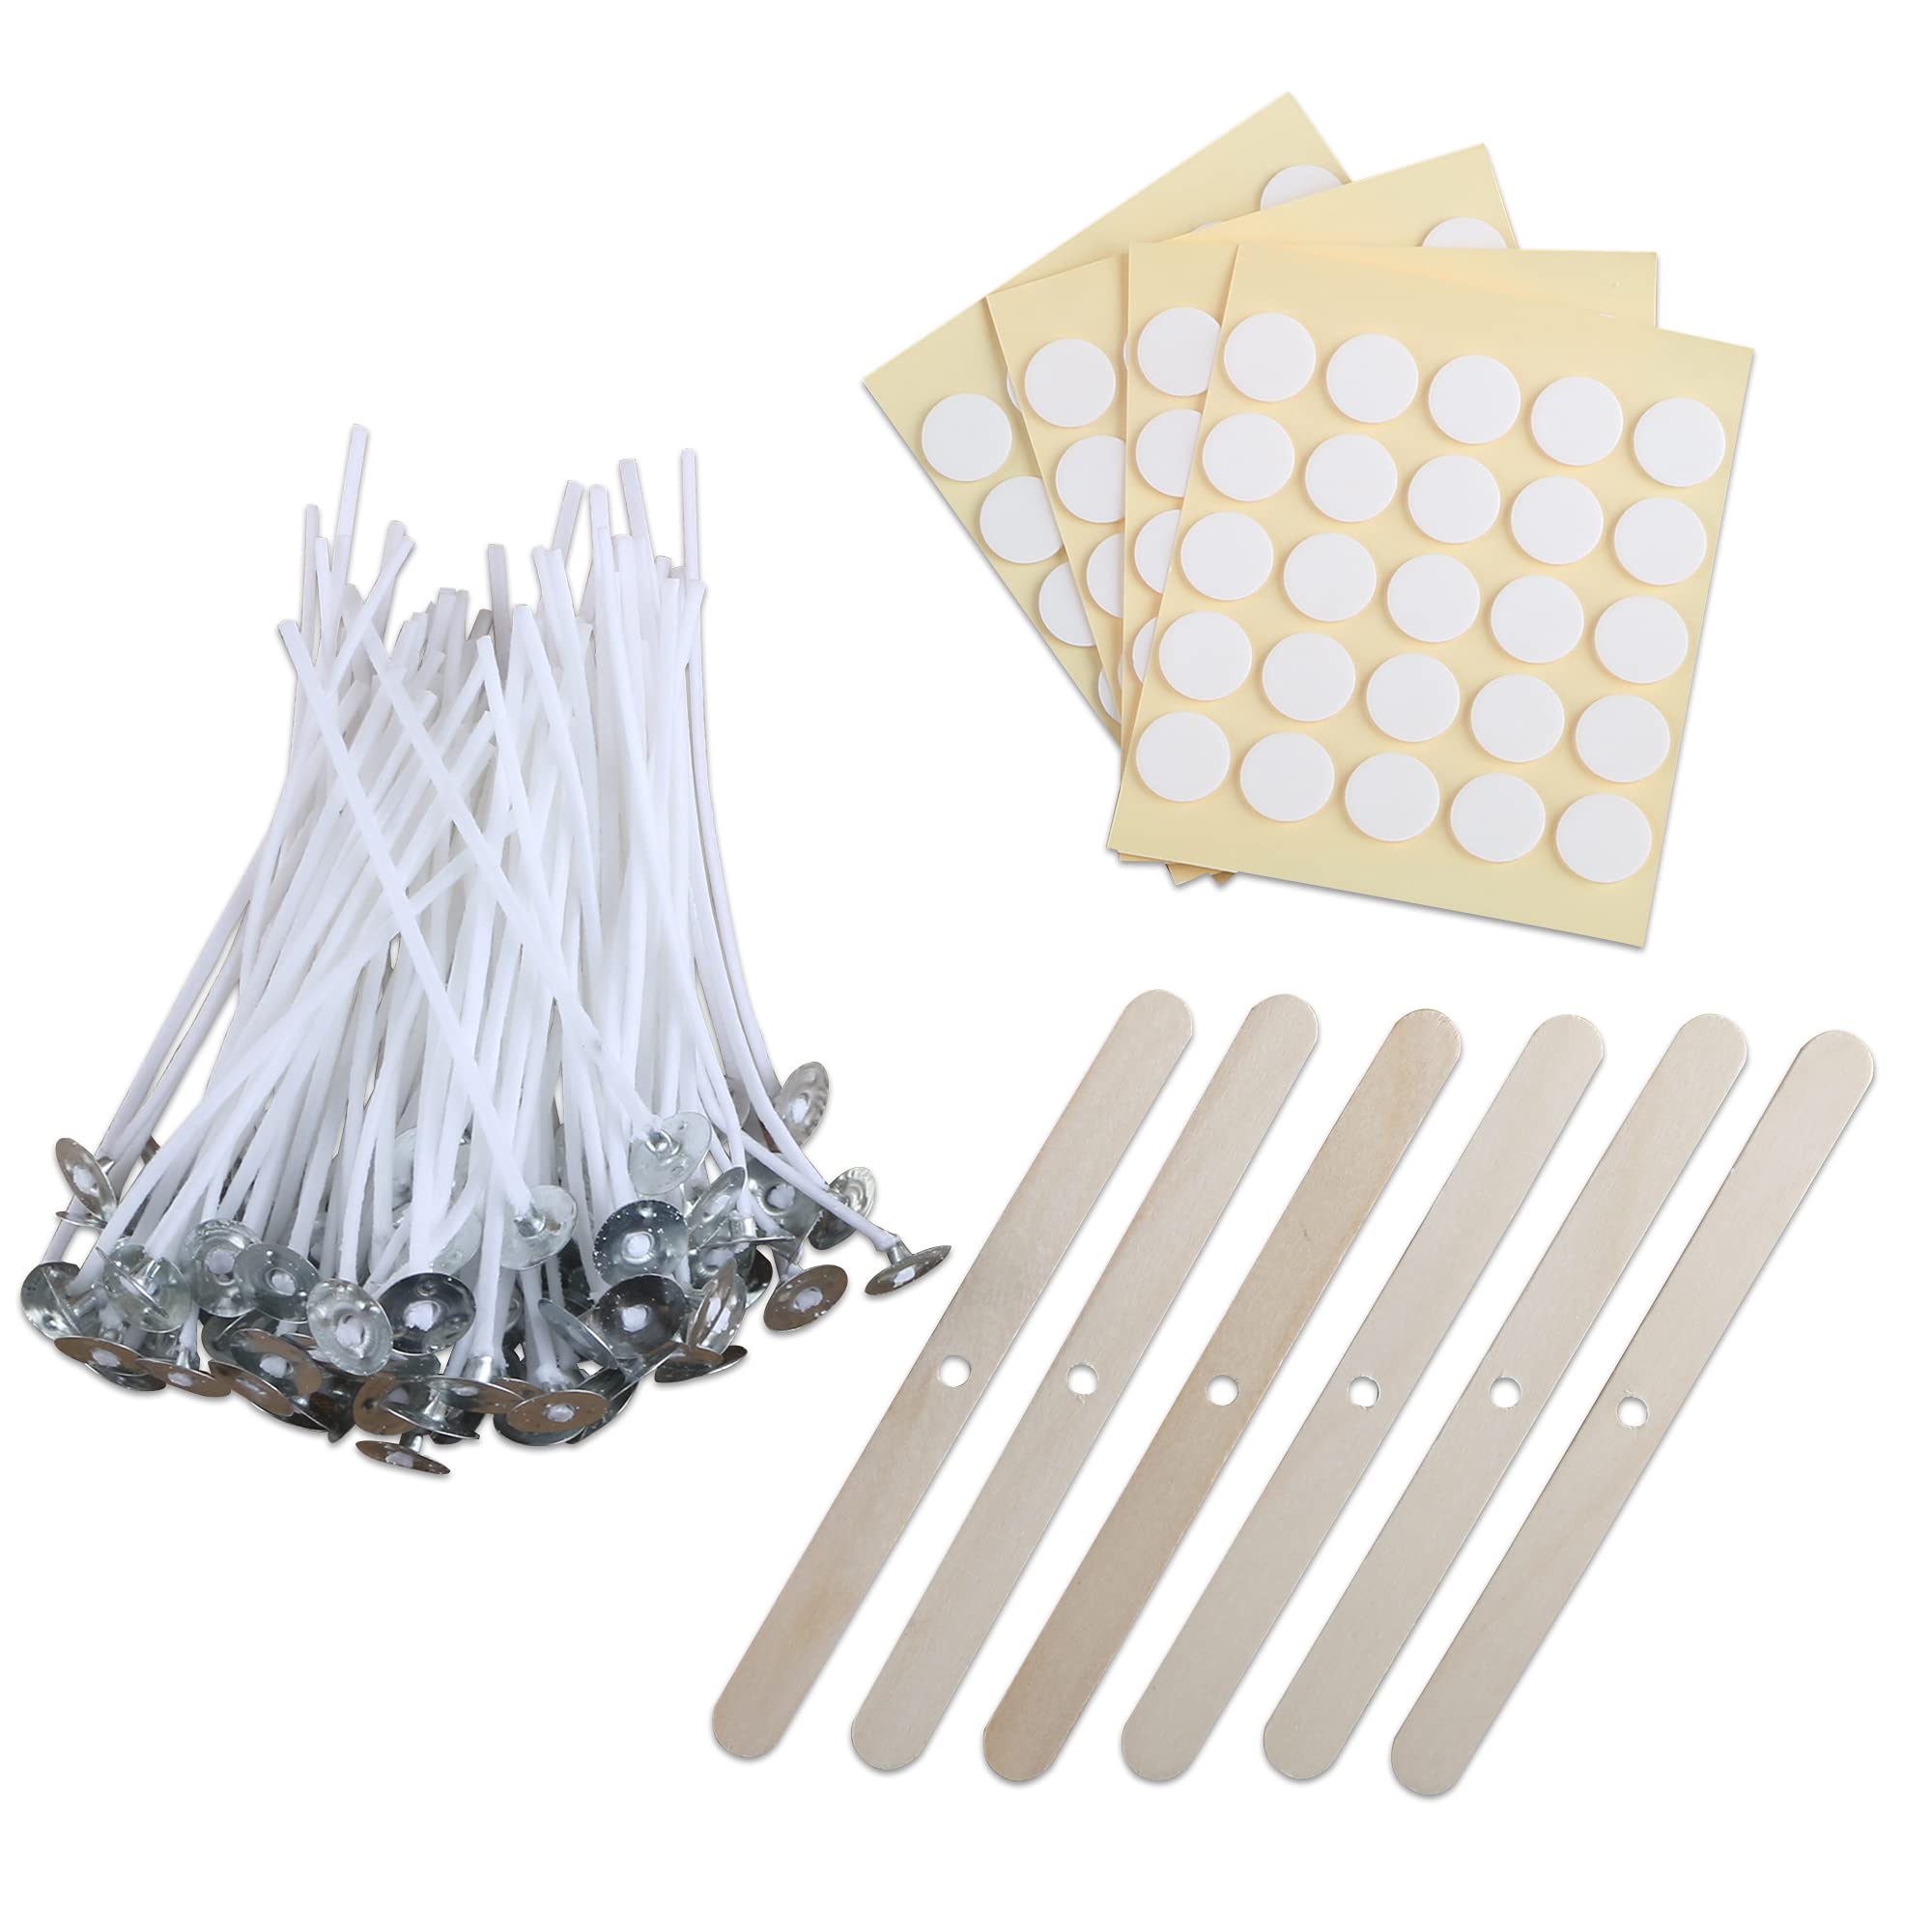 100pcs Cotton Candle Wicks, 6 inches Low Smoke Pre-Waxed Candle